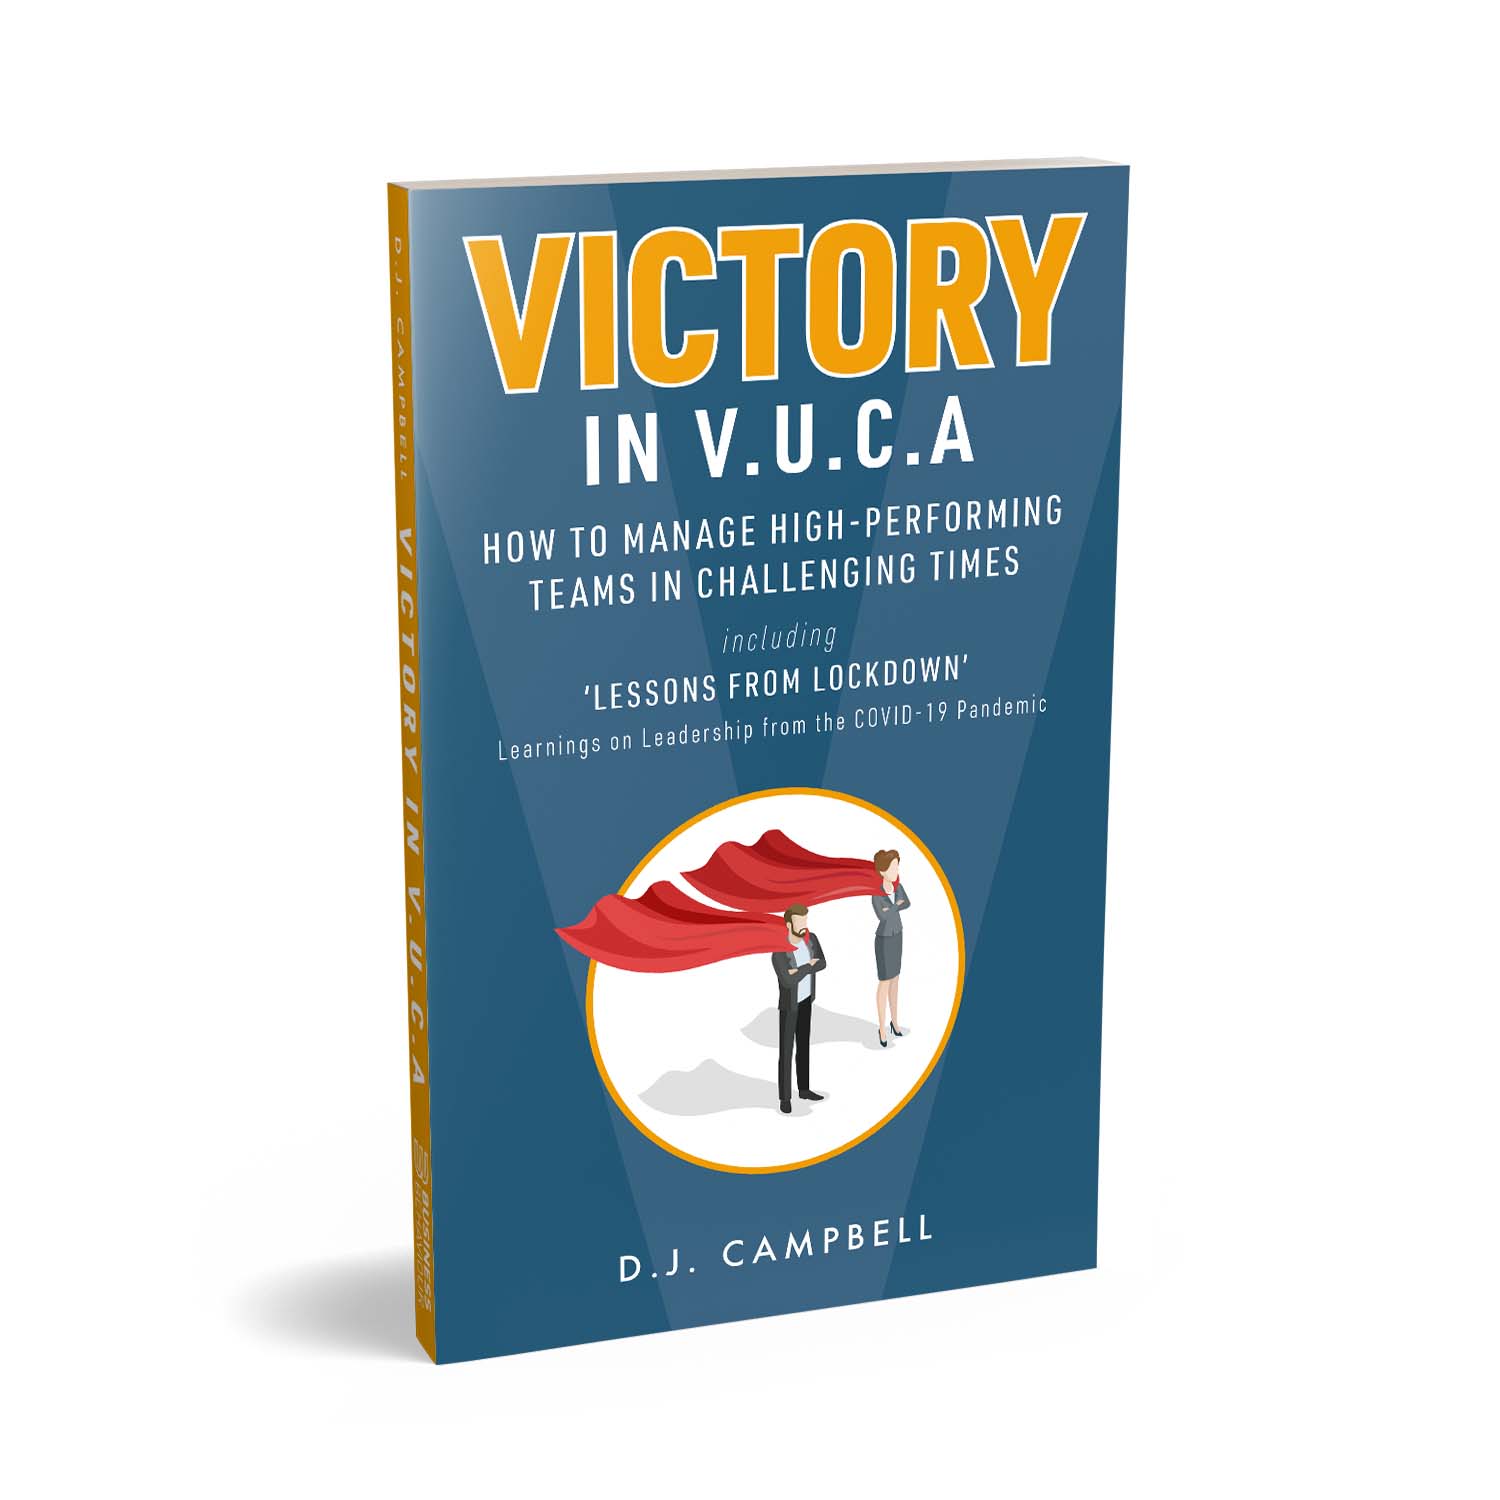 'Victory in VUCA' is a business leadership guide in volatile and uncertain times. The author is D.J. Campbell. The book cover and interior were designed by Mark Thomas of coverness.com. To find out more about my book design services, please visit www.coverness.com